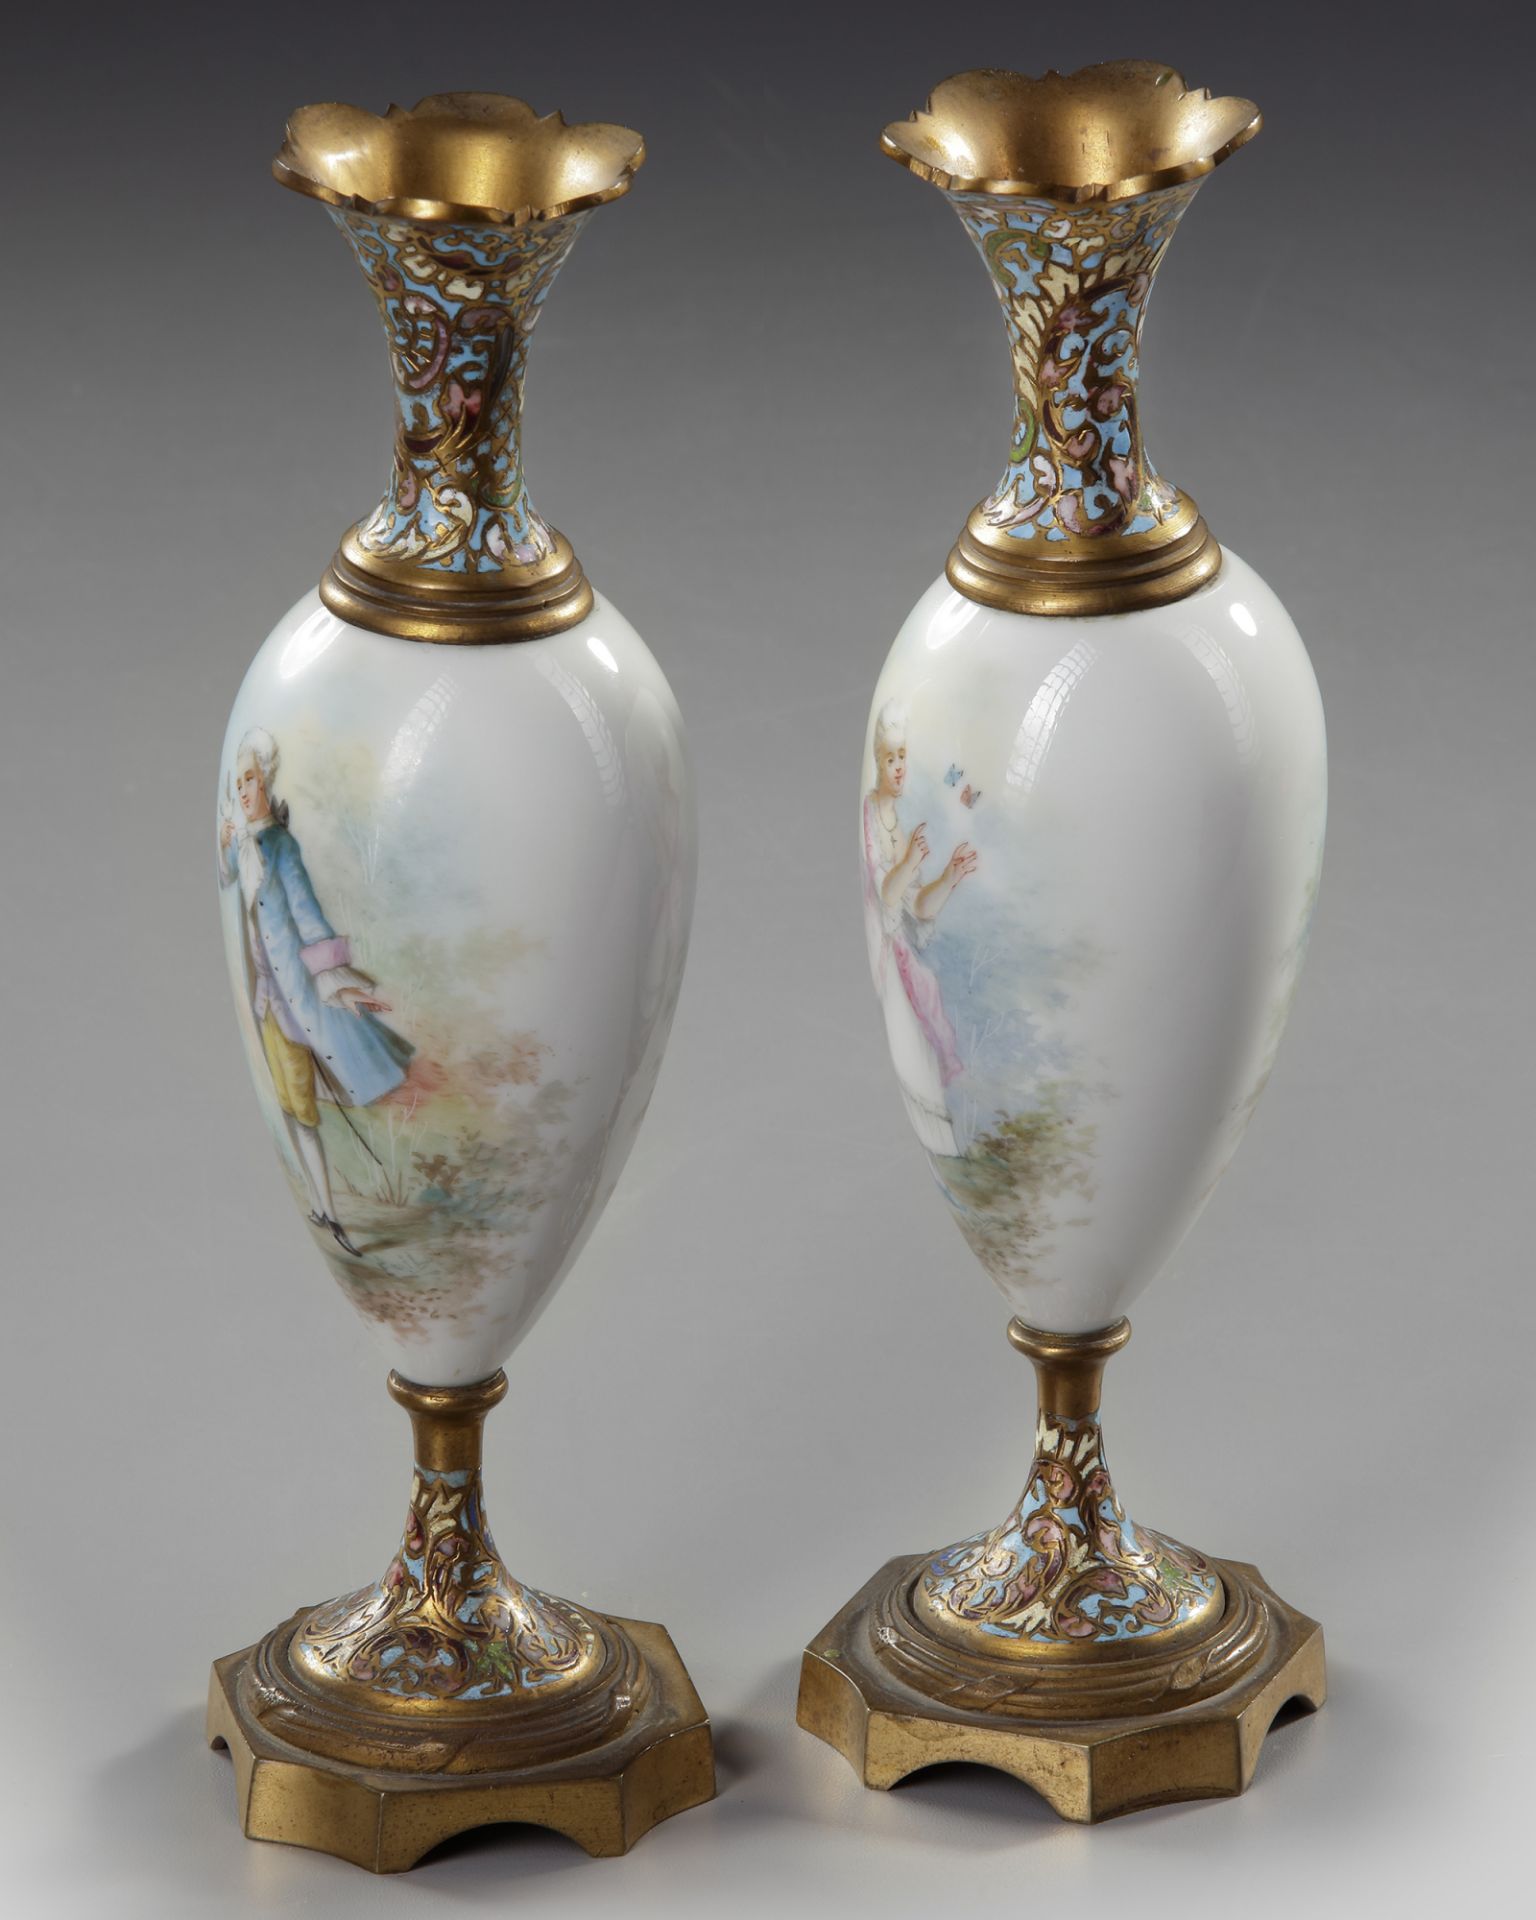 A PAIR OF FRENCH SMALL VASES, 19TH CENTURY - Image 3 of 3